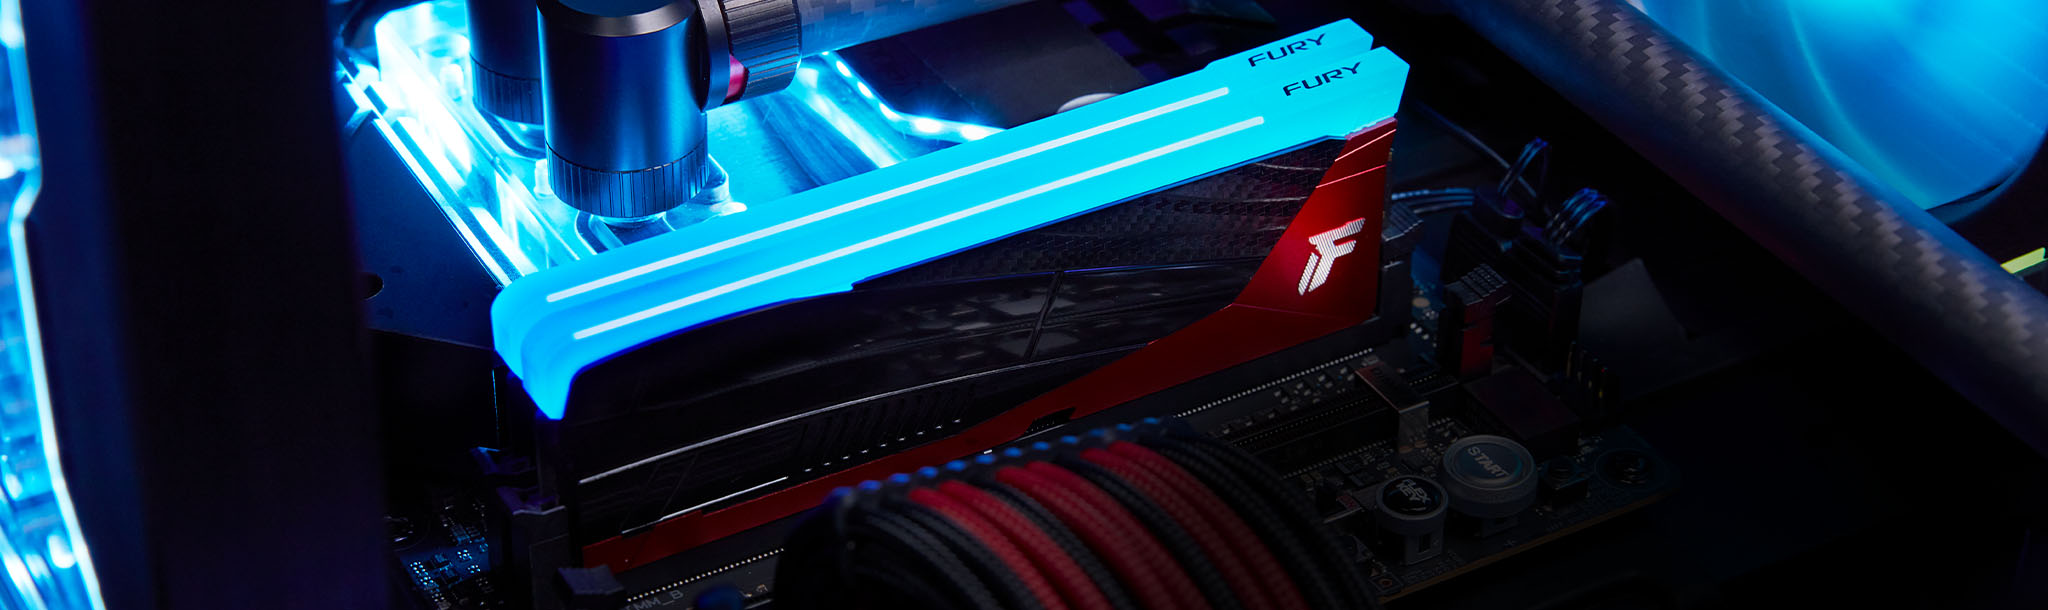 Kingston FURY Renegade DDR5 RGB Limited Edition modules lit in a motherboard with logos of MSI, ASUS, ASRock, and GIGABYTE.